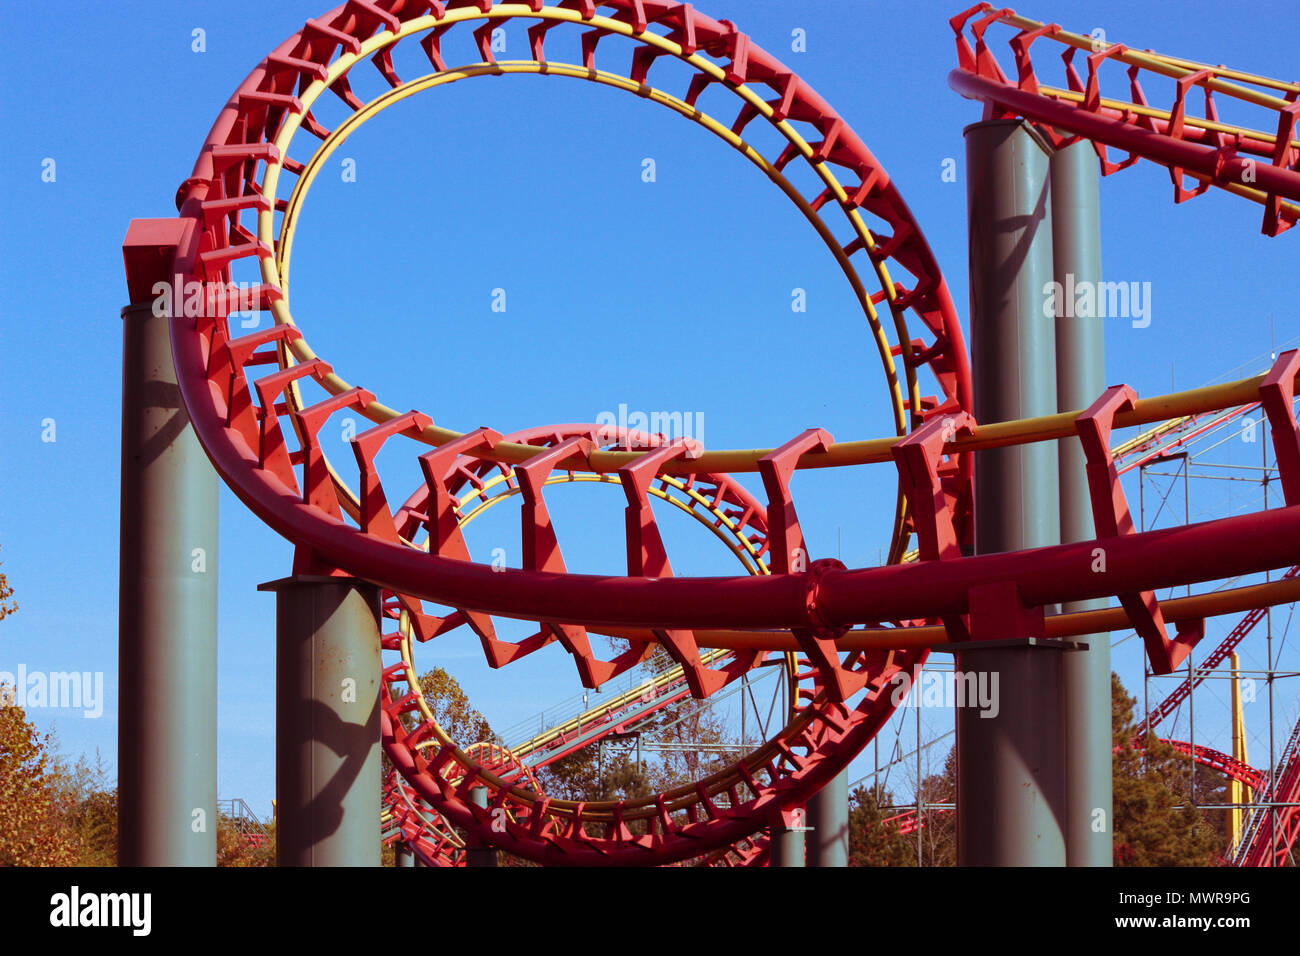 A looping, twisting, red steel rollercoaster thrills passengers with speed and turns. Stock Photo